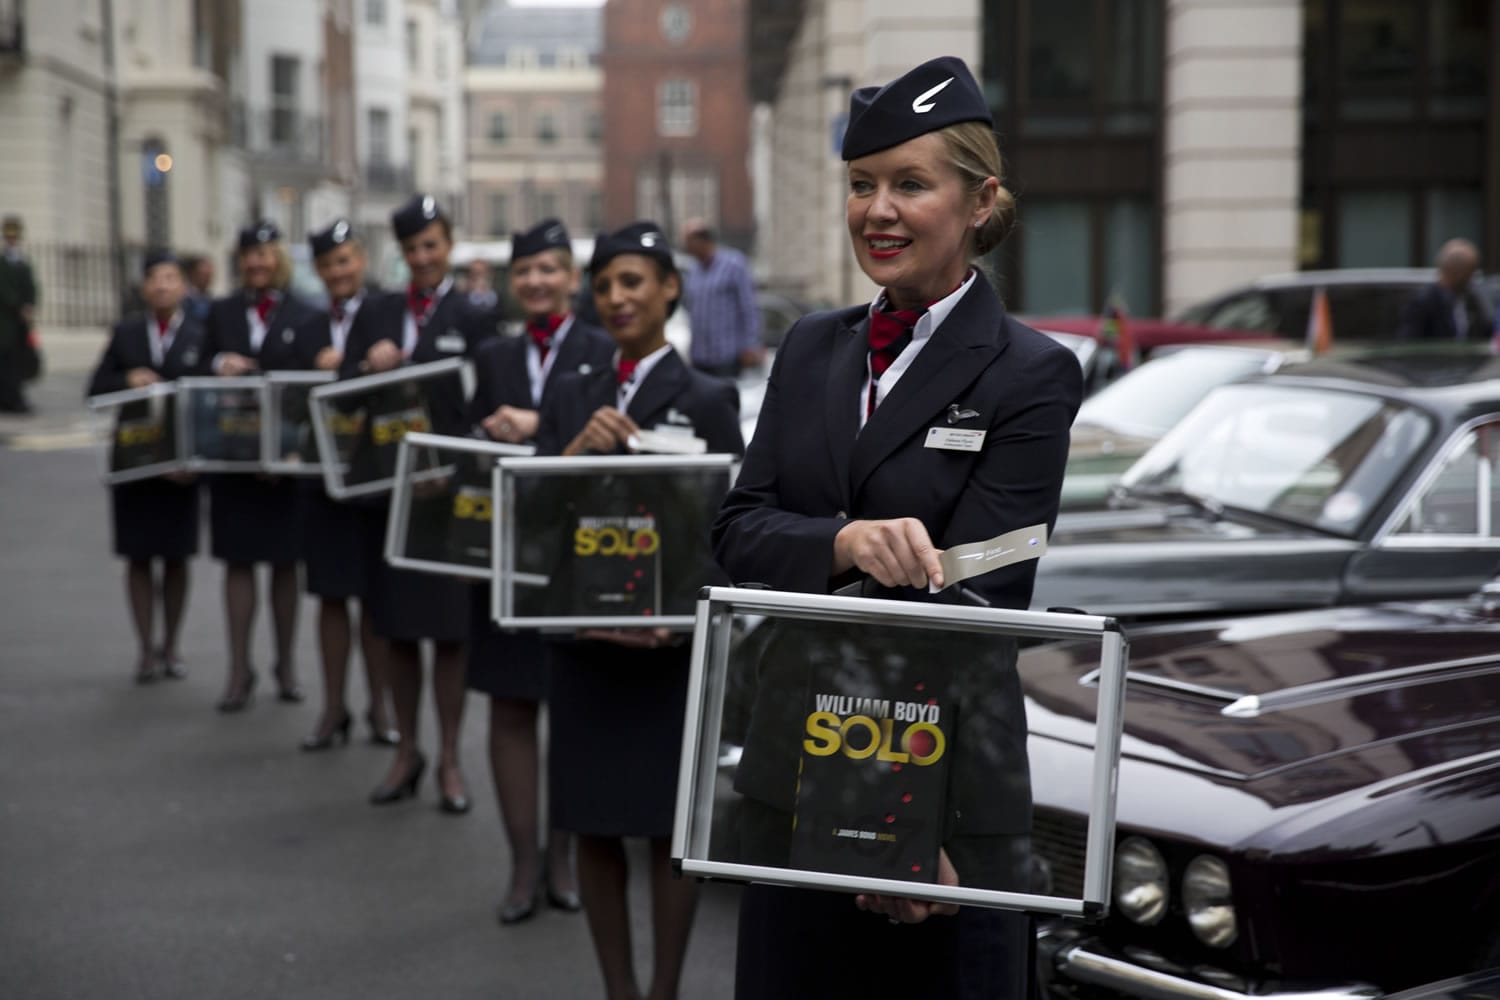 Flight attendants pose for photographers with copies of the new James Bond novel &quot;Solo&quot; during a launch photocall outside the Dorchester Hotel in London on Wednesday.